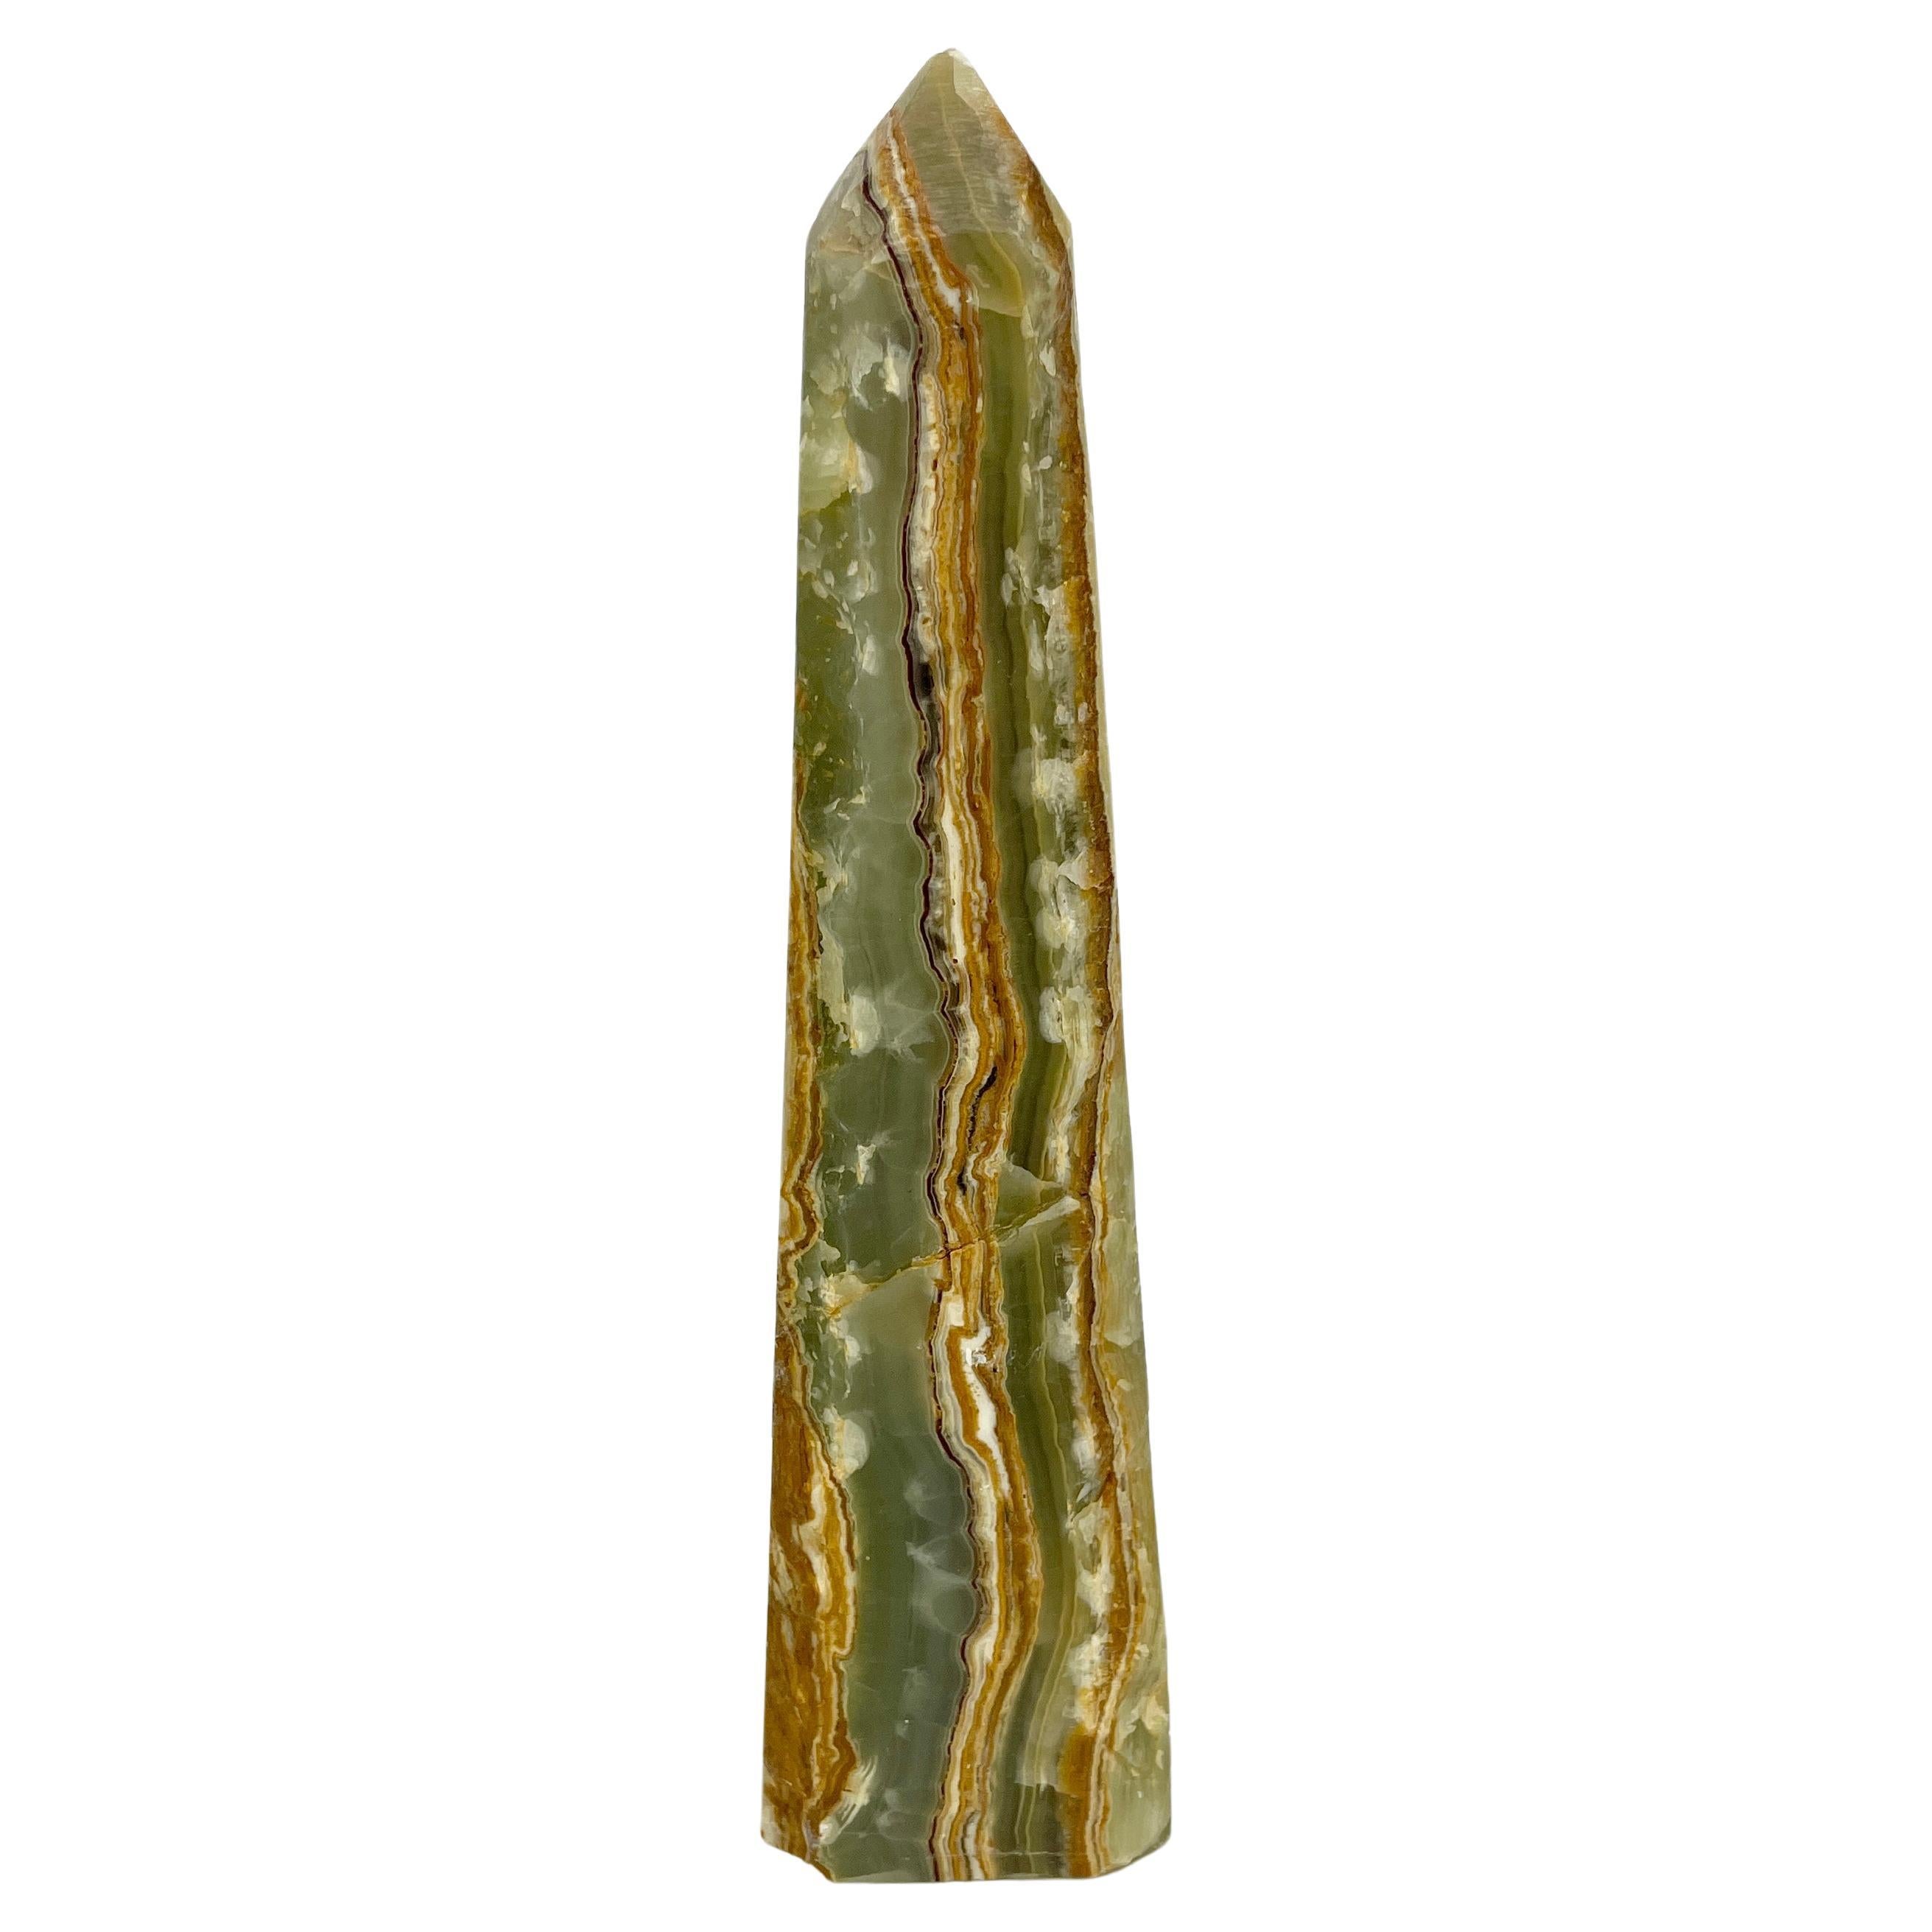 Empire Green Onyx Obelisk With Natural Rough Edge Finish